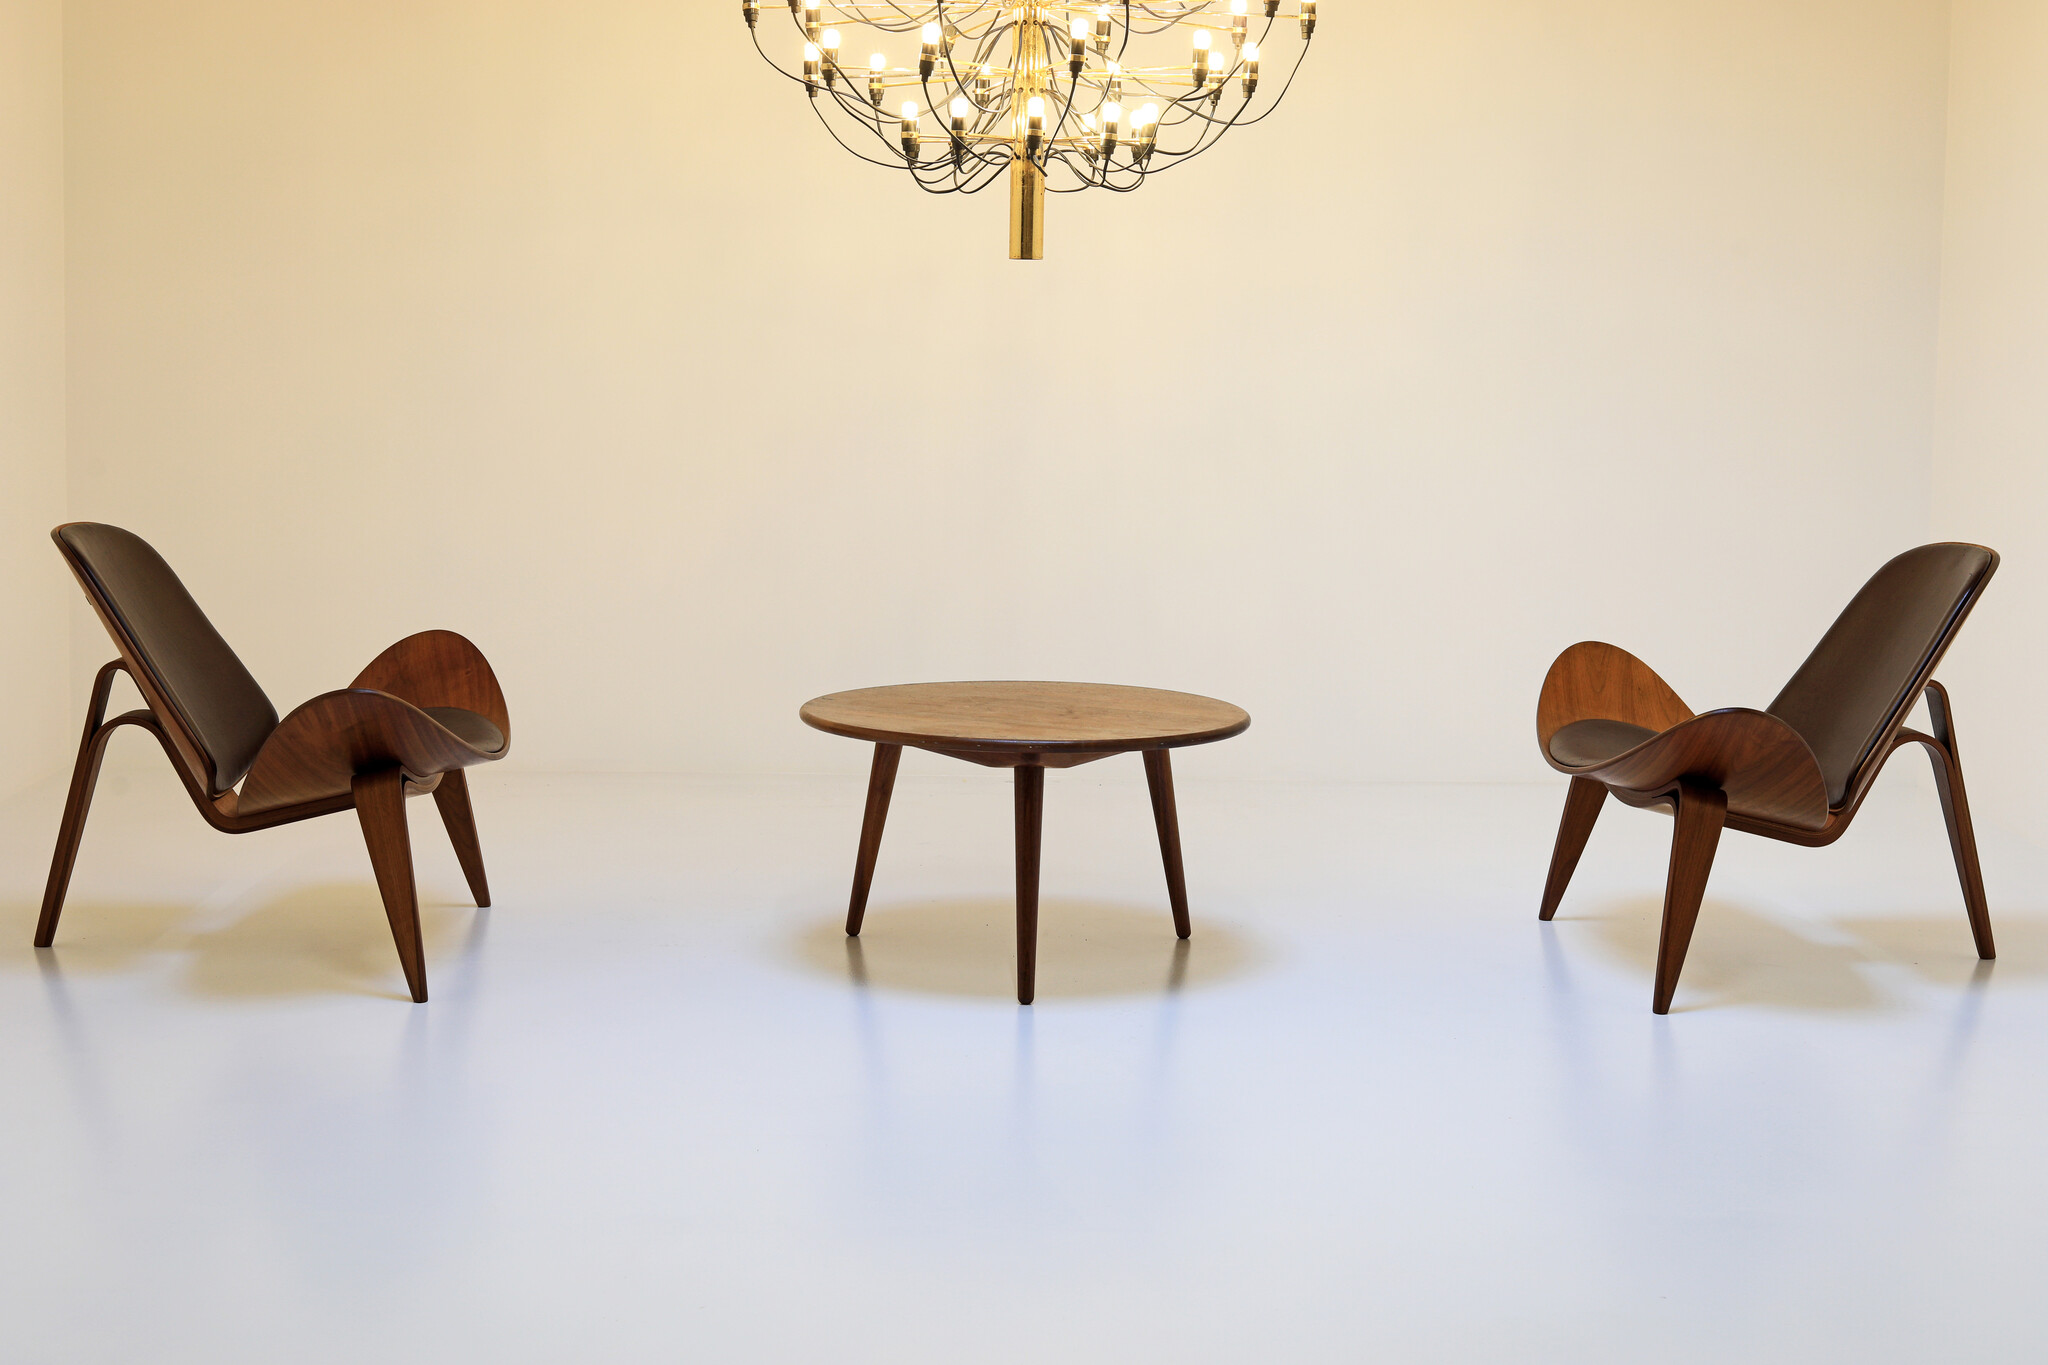 Set of Shell chairs by Hans Wegner, 1963